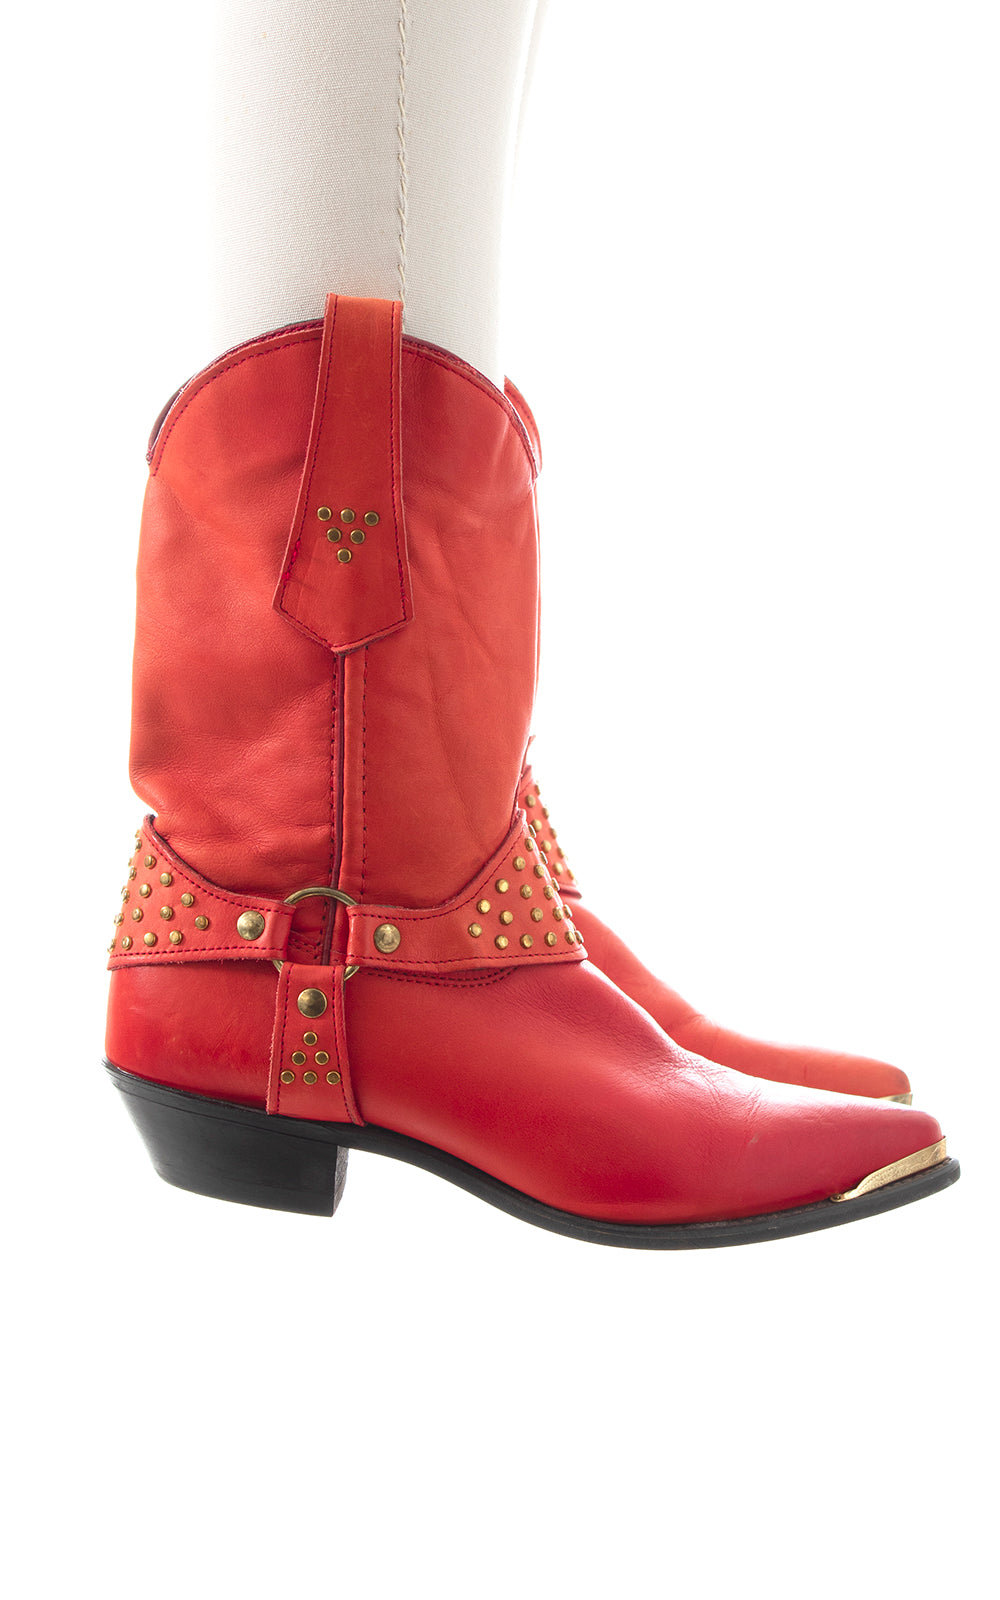 1980s 1990s WRANGLER Studded Red Leather Boots | US 7.5